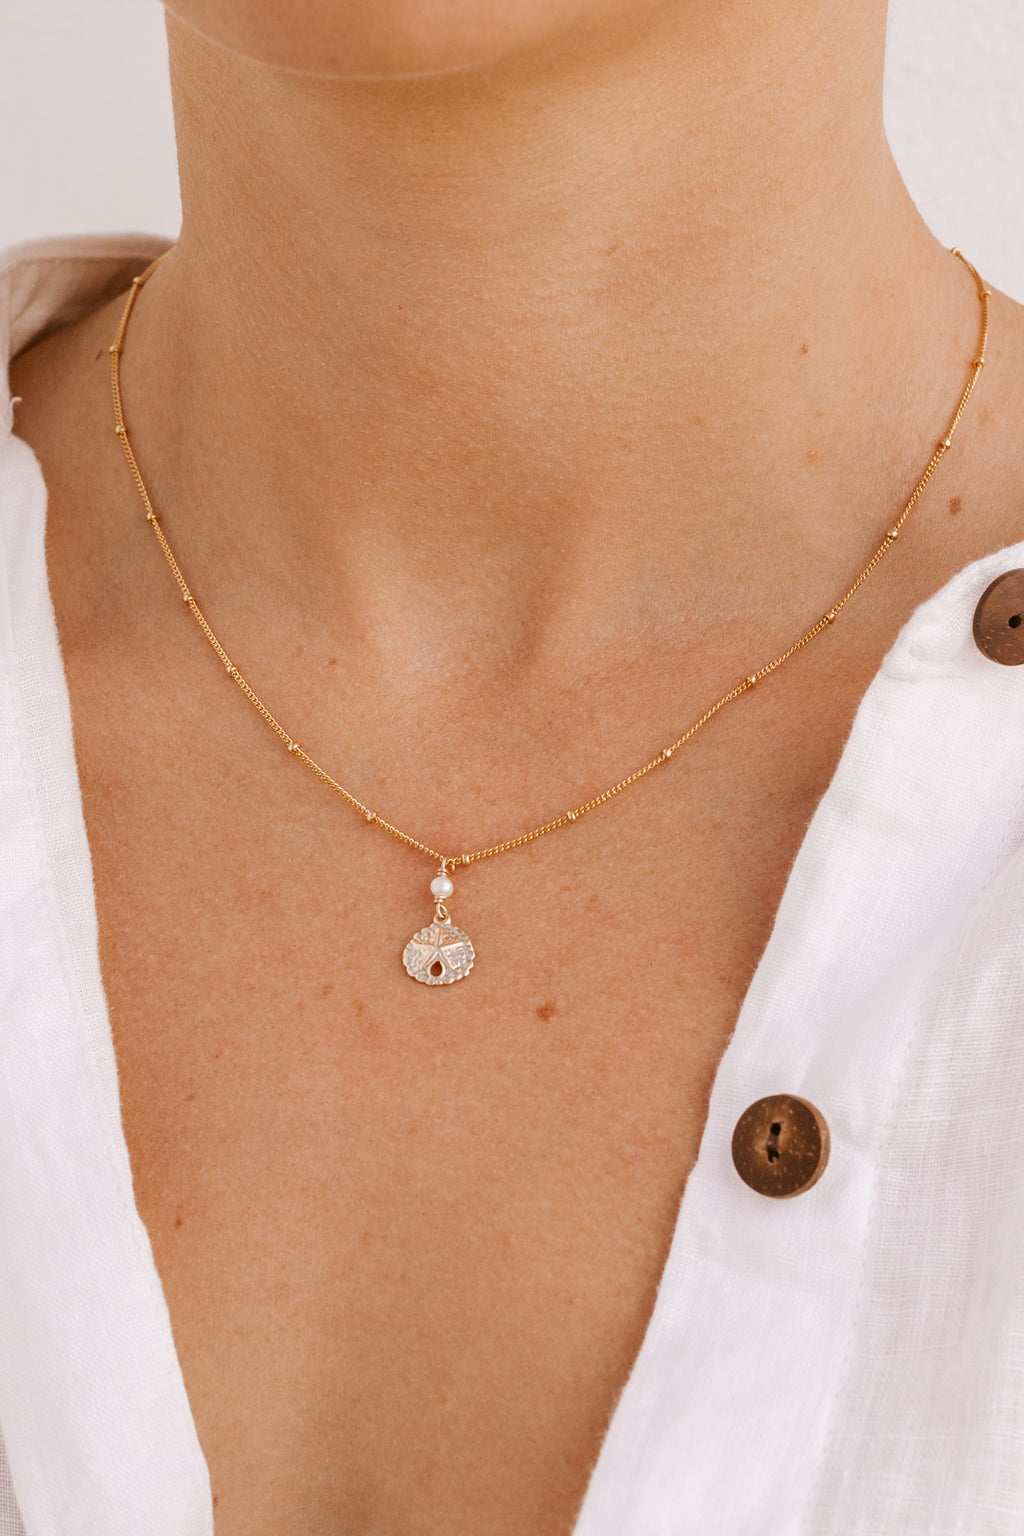 Sand Dollar Pearl Satellite Necklace  - Gold Fill